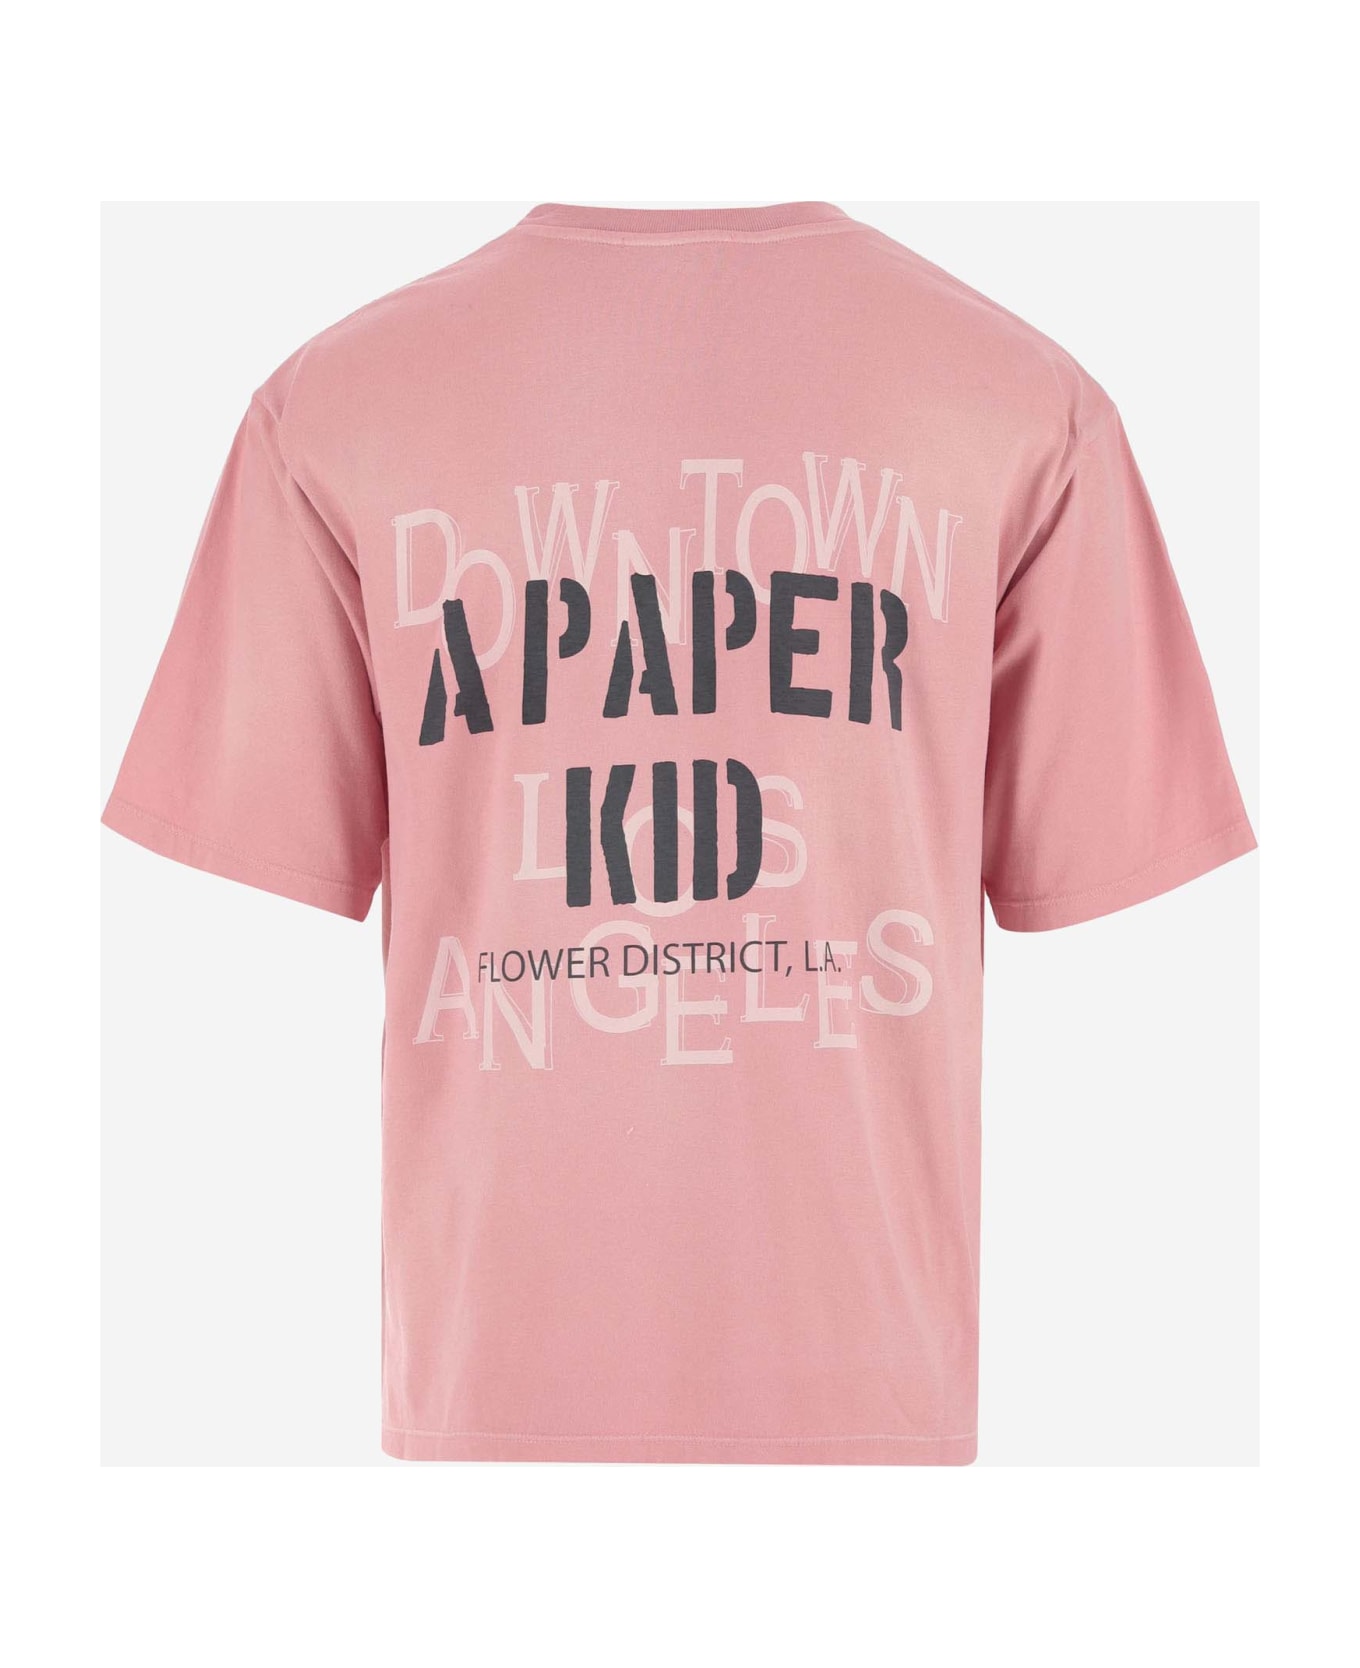 A Paper Kid Cotton T-shirt With Logo - Coral Red